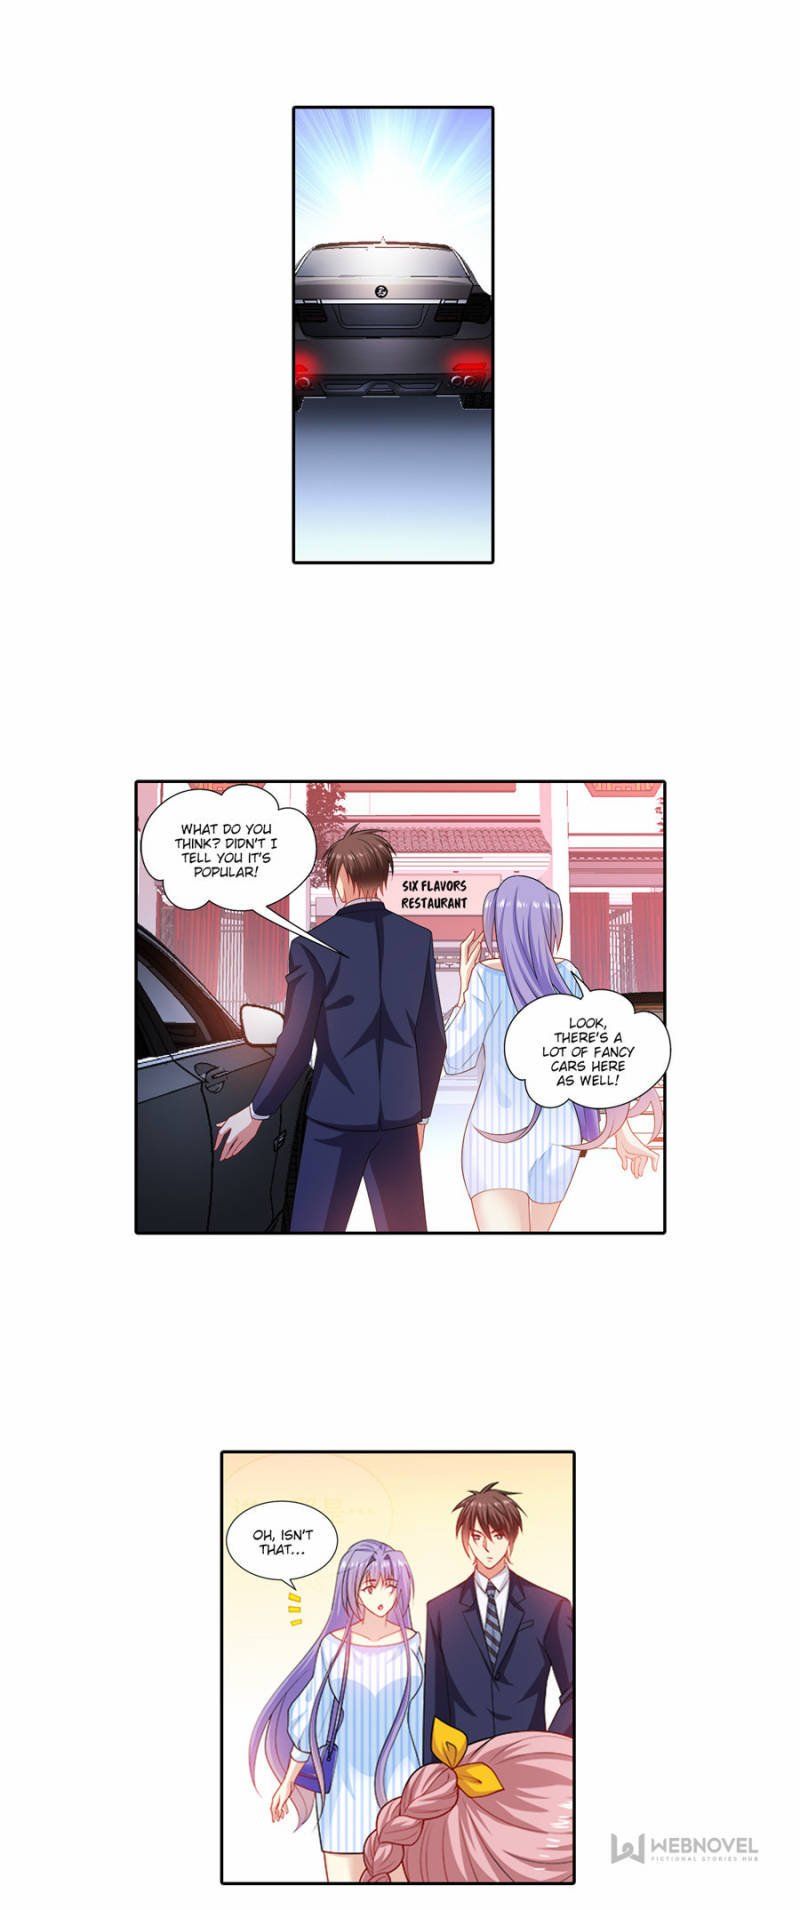 So Pure, So Flirtatious ( Very Pure ) Chapter 293 page 4